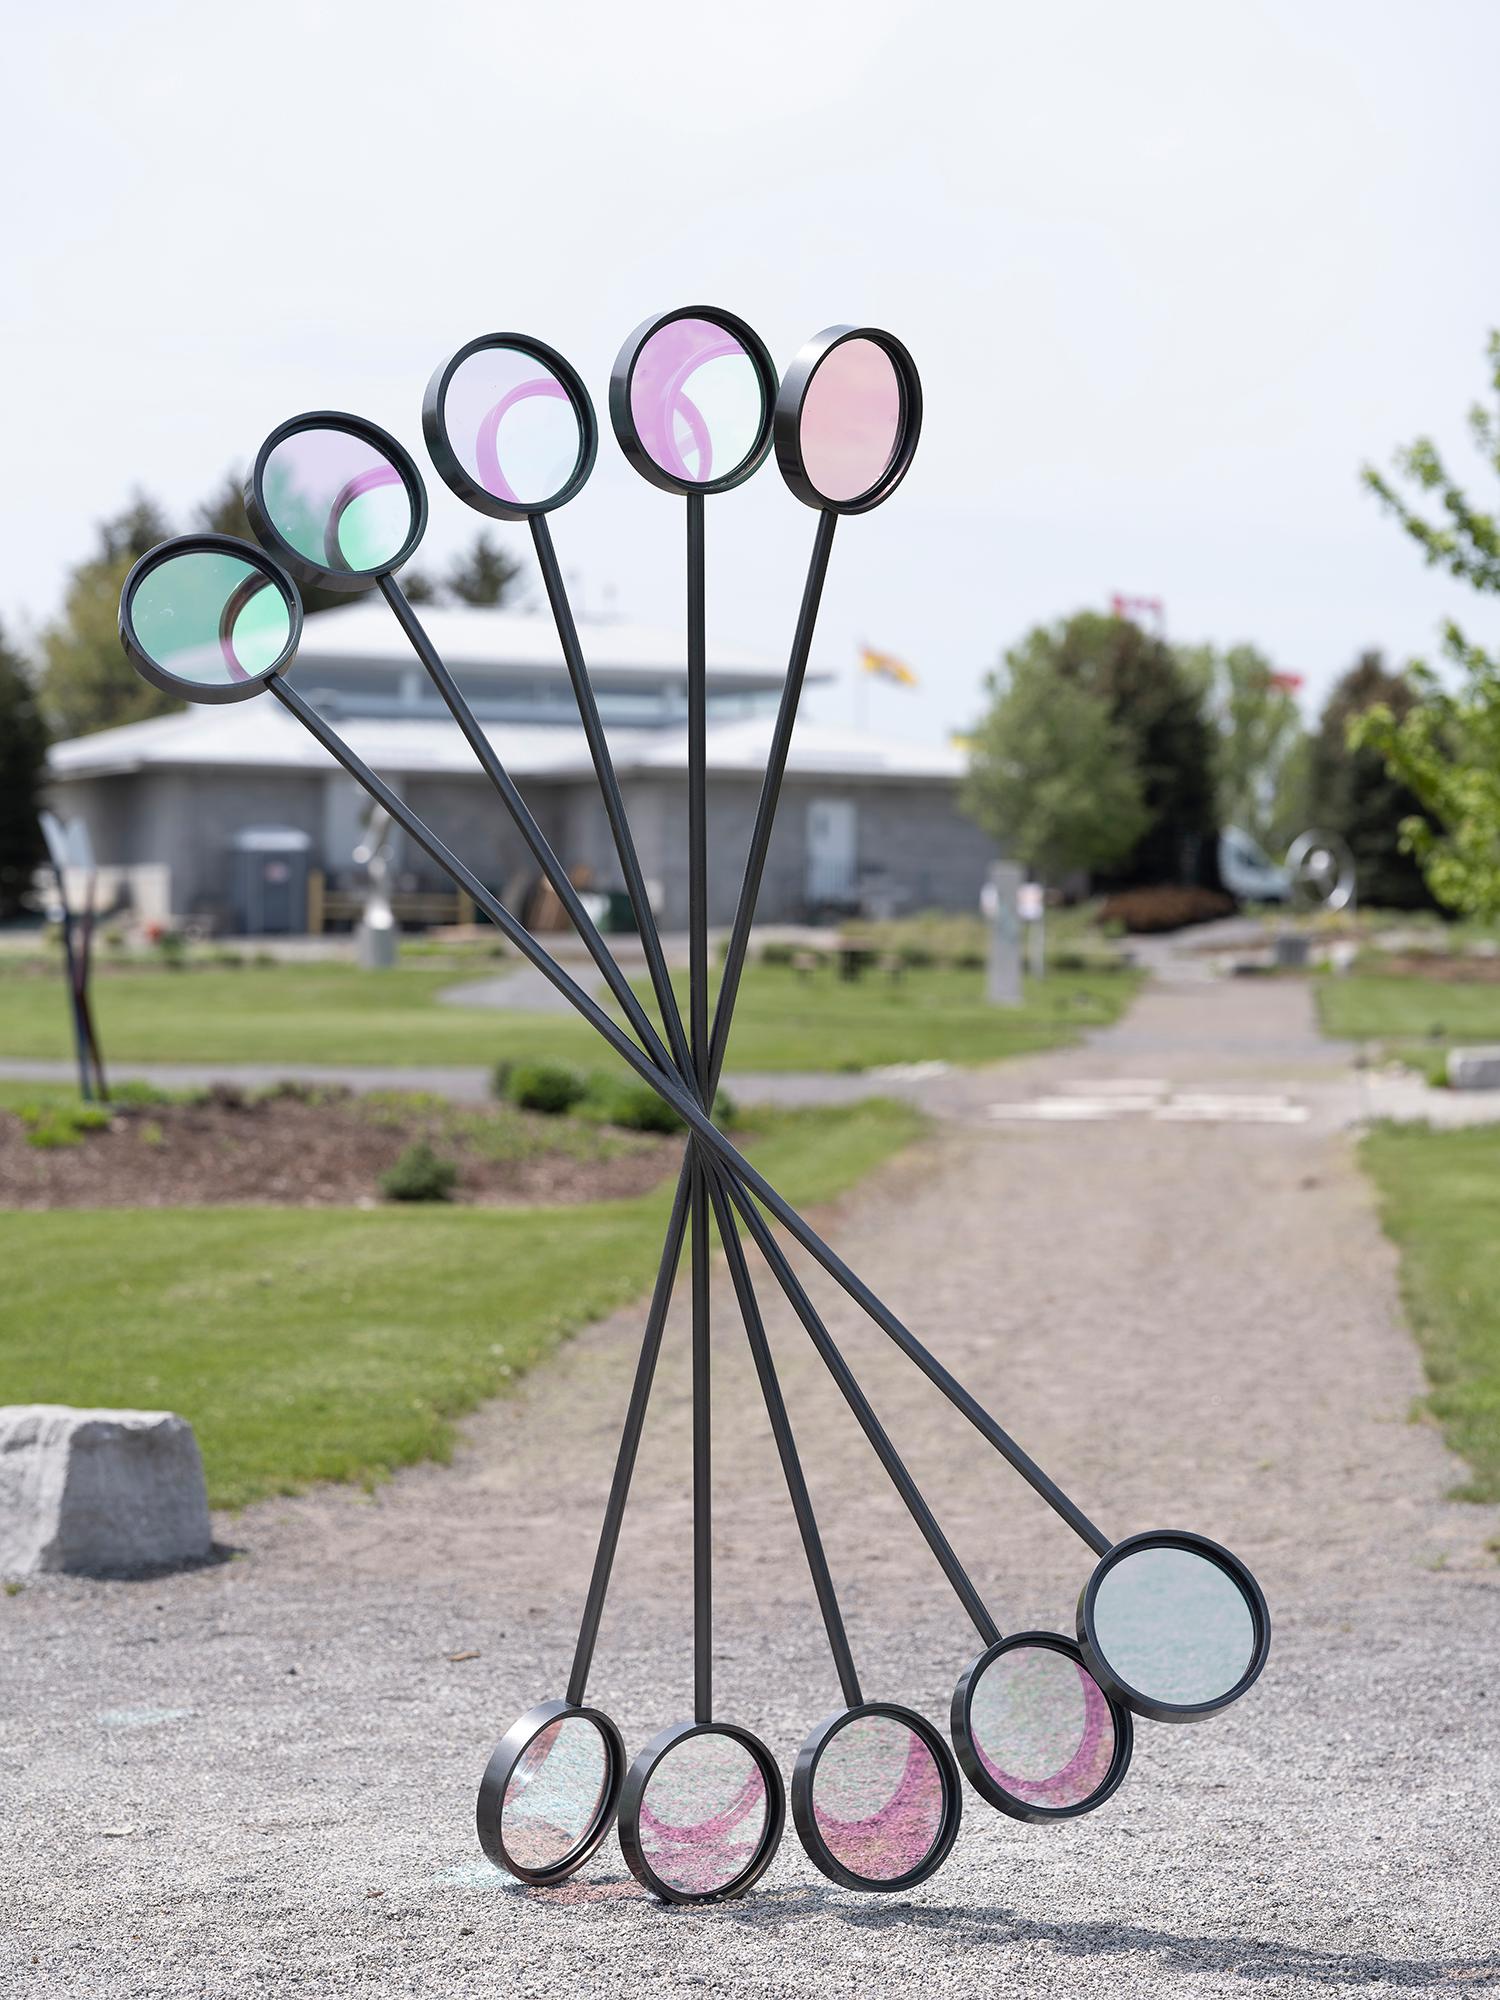 Chromatica - tall, geometric abstract, powder coated steel outdoor sculpture - Abstract Geometric Sculpture by Ryan Van Der Hout